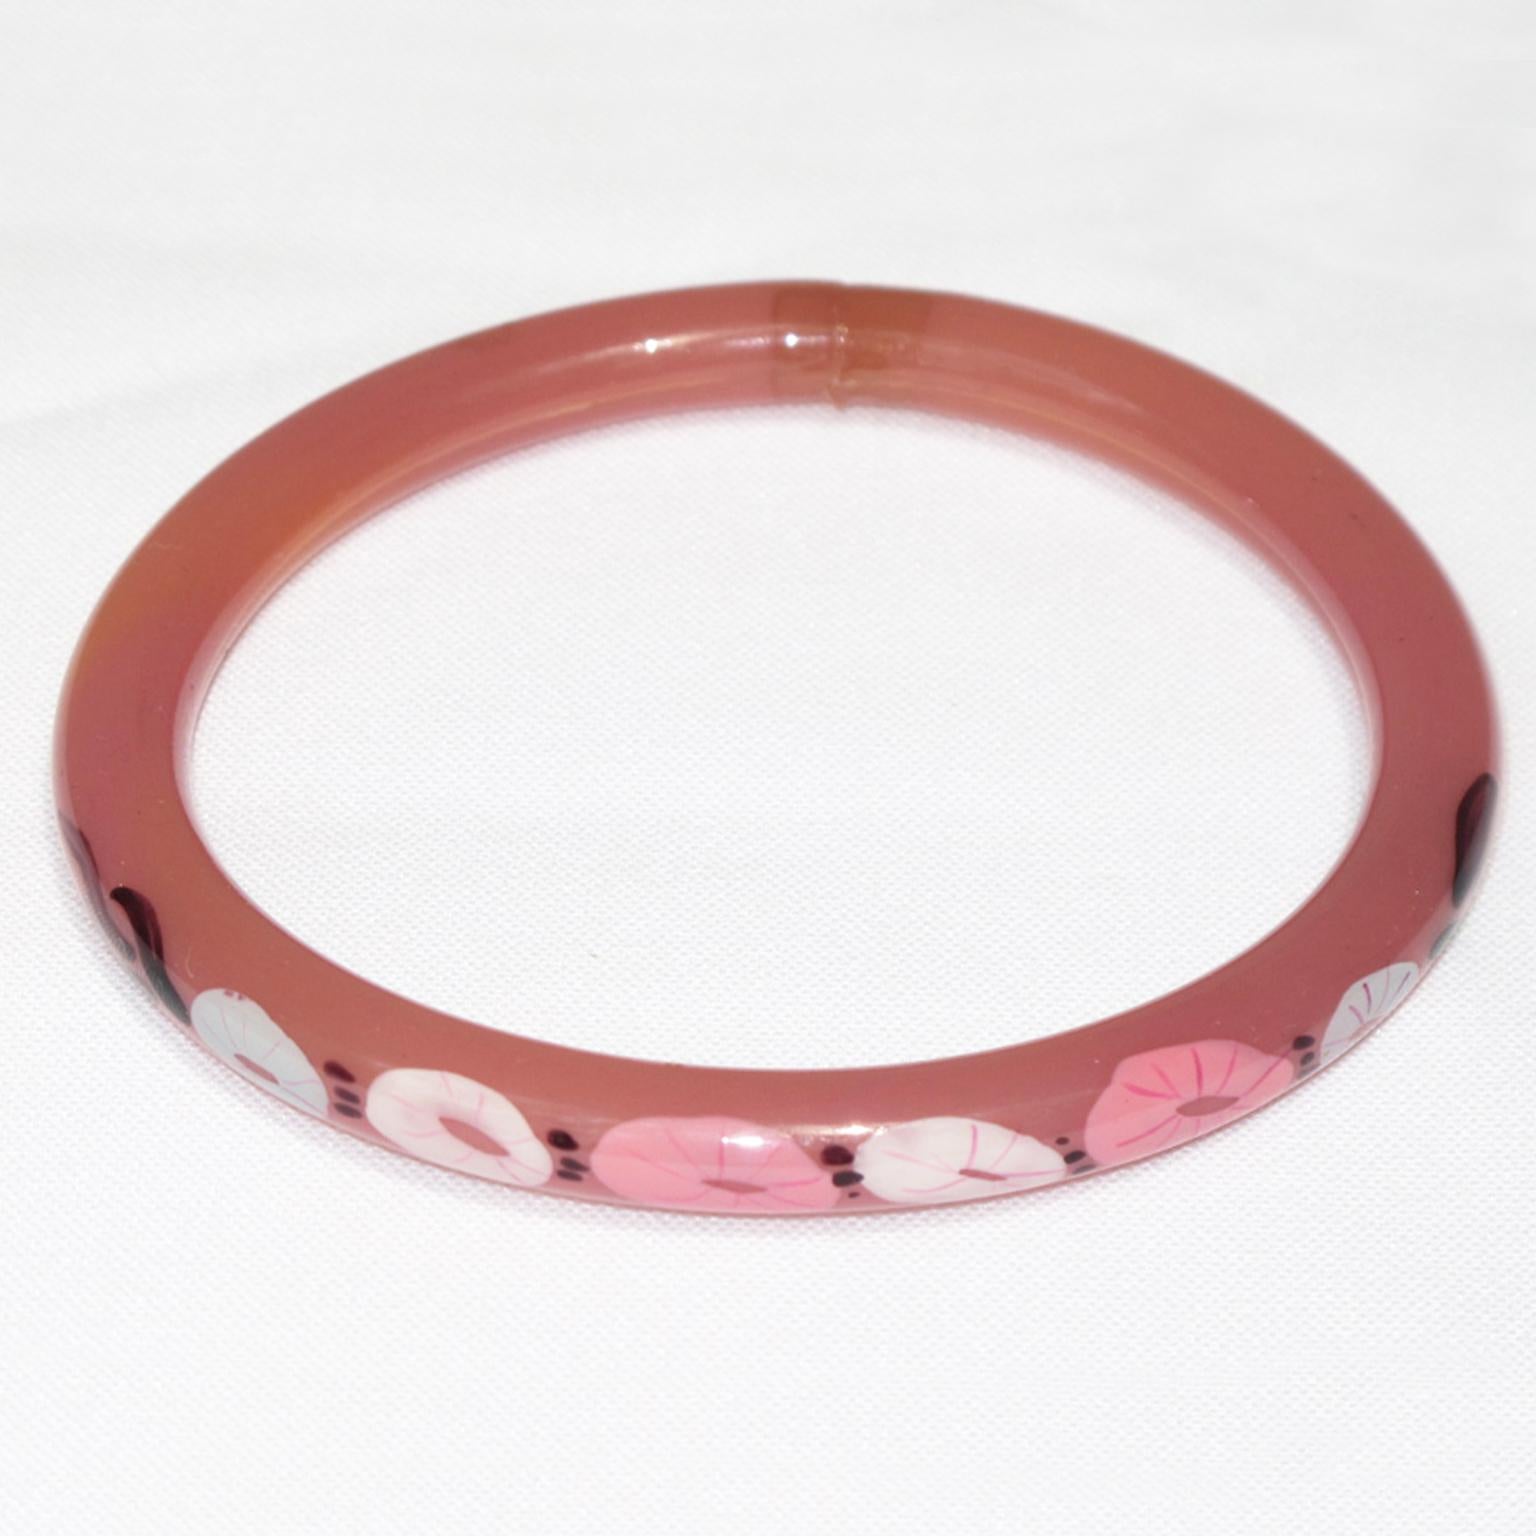 This sweet 1920s French Art Deco celluloid bracelet bangle features a light hollow tube shape with a floral design on one side of the bracelet. 
The hollow bracelet technique is an ancient technique applied to jewelry at the turn of the 20th